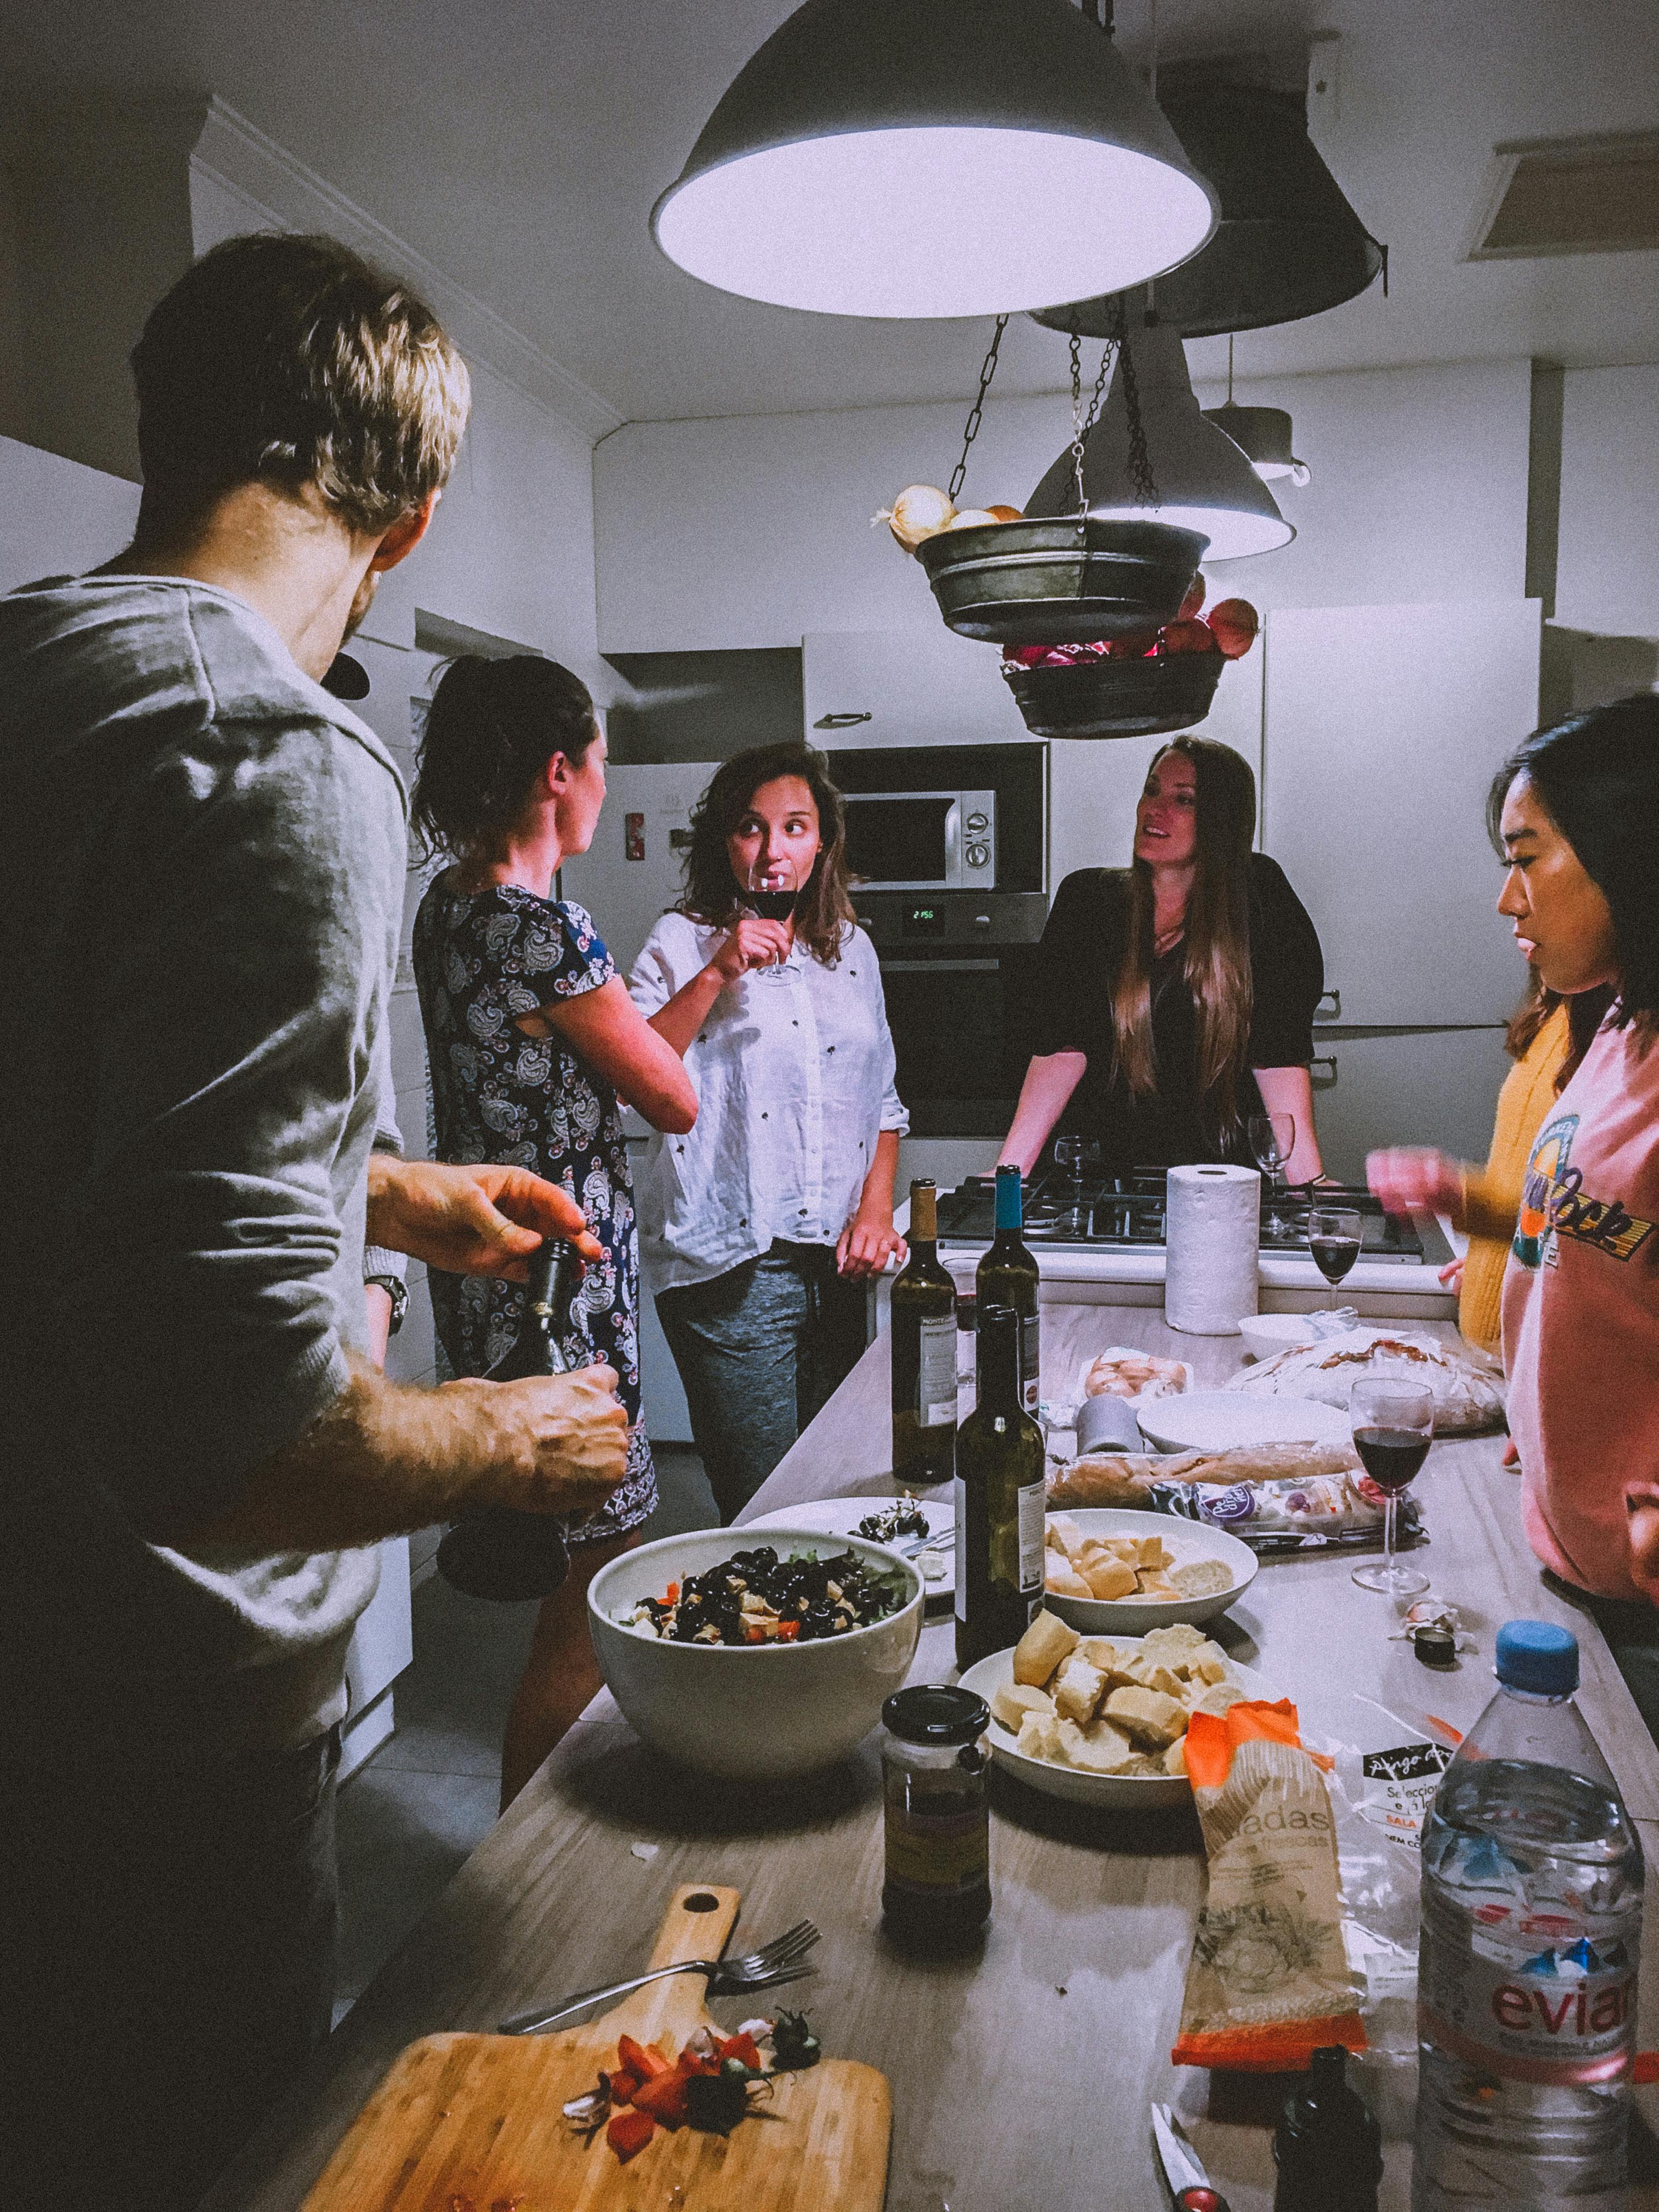 People talking in the kitchen | Source: Pexels